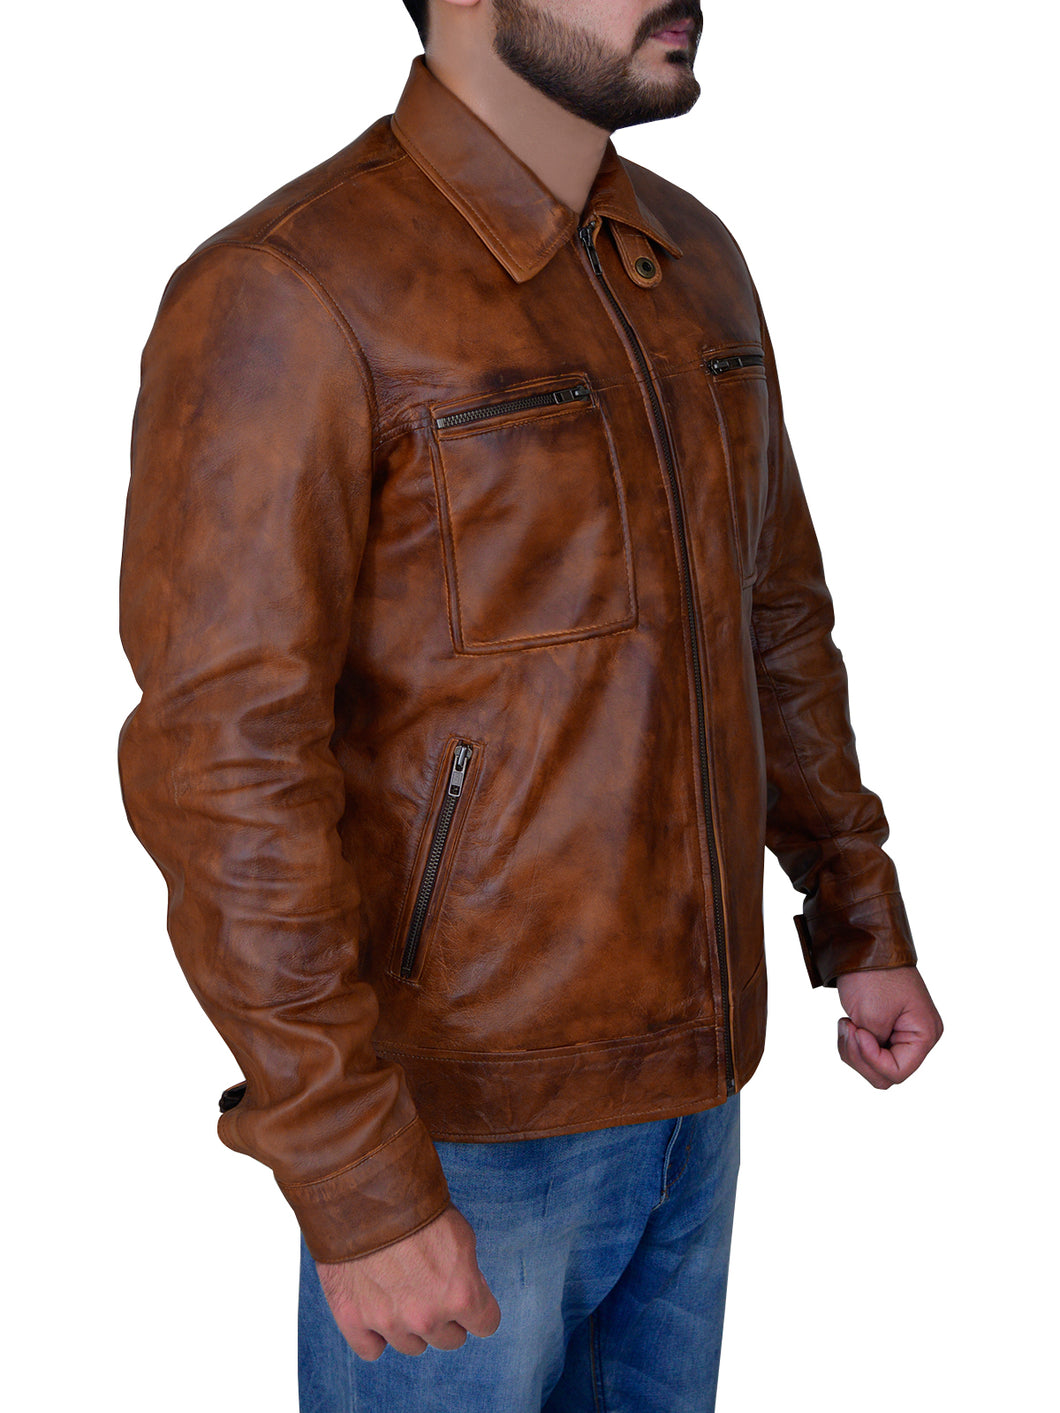 Men’s Distressed Brown Jacket - Shearling leather